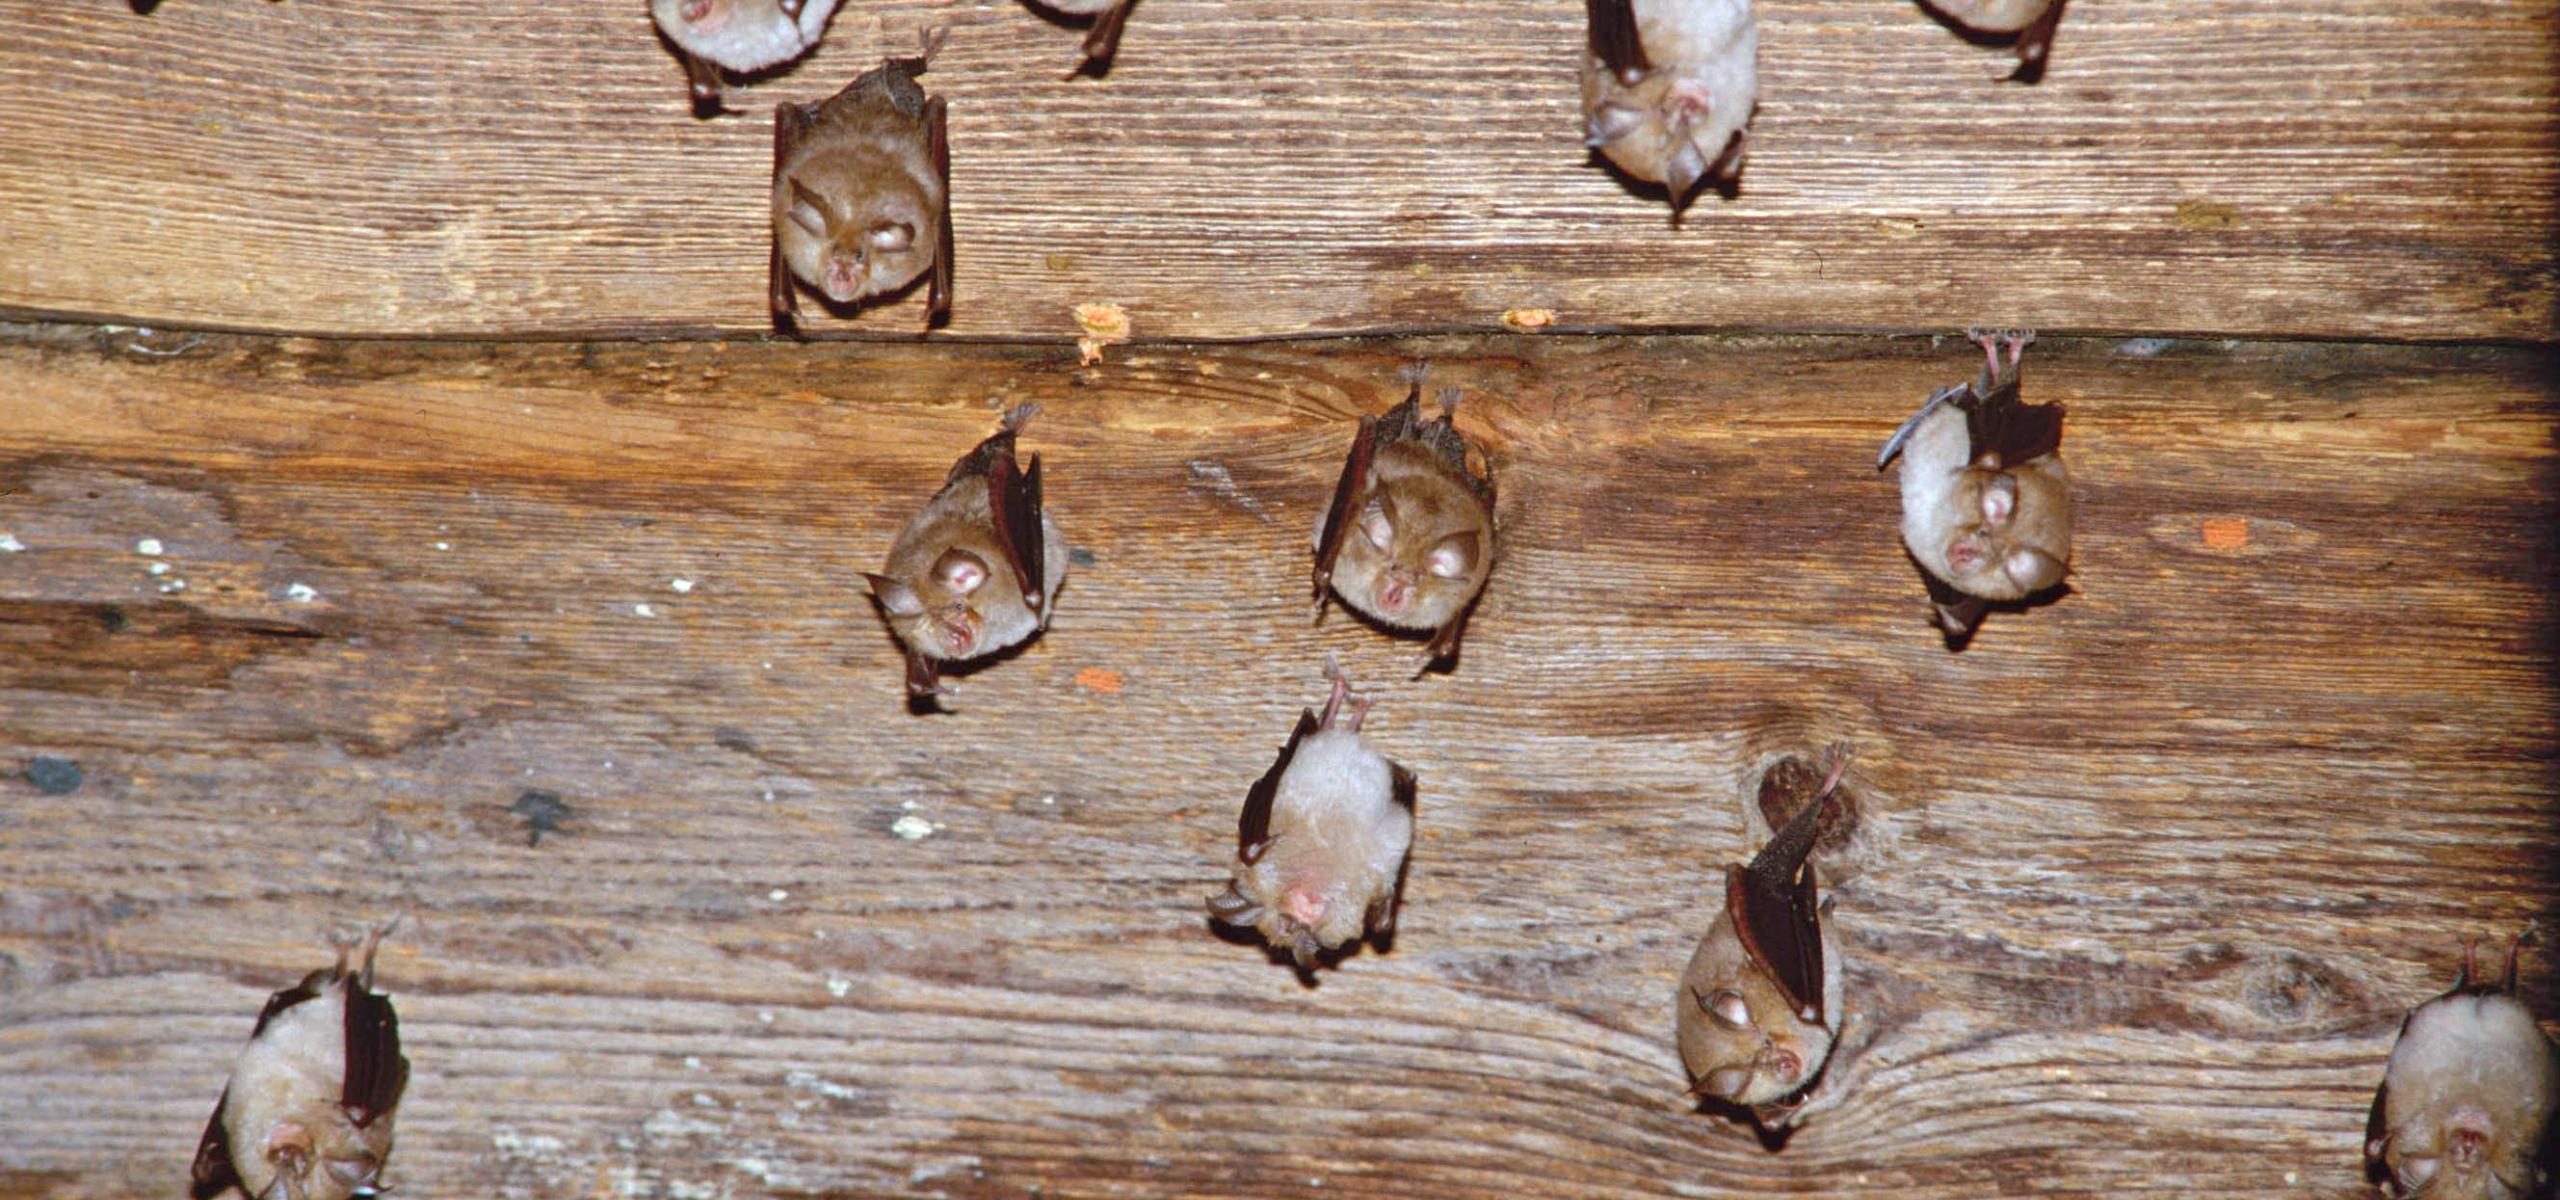 Small bats hanging upside down from the wooden ceiling